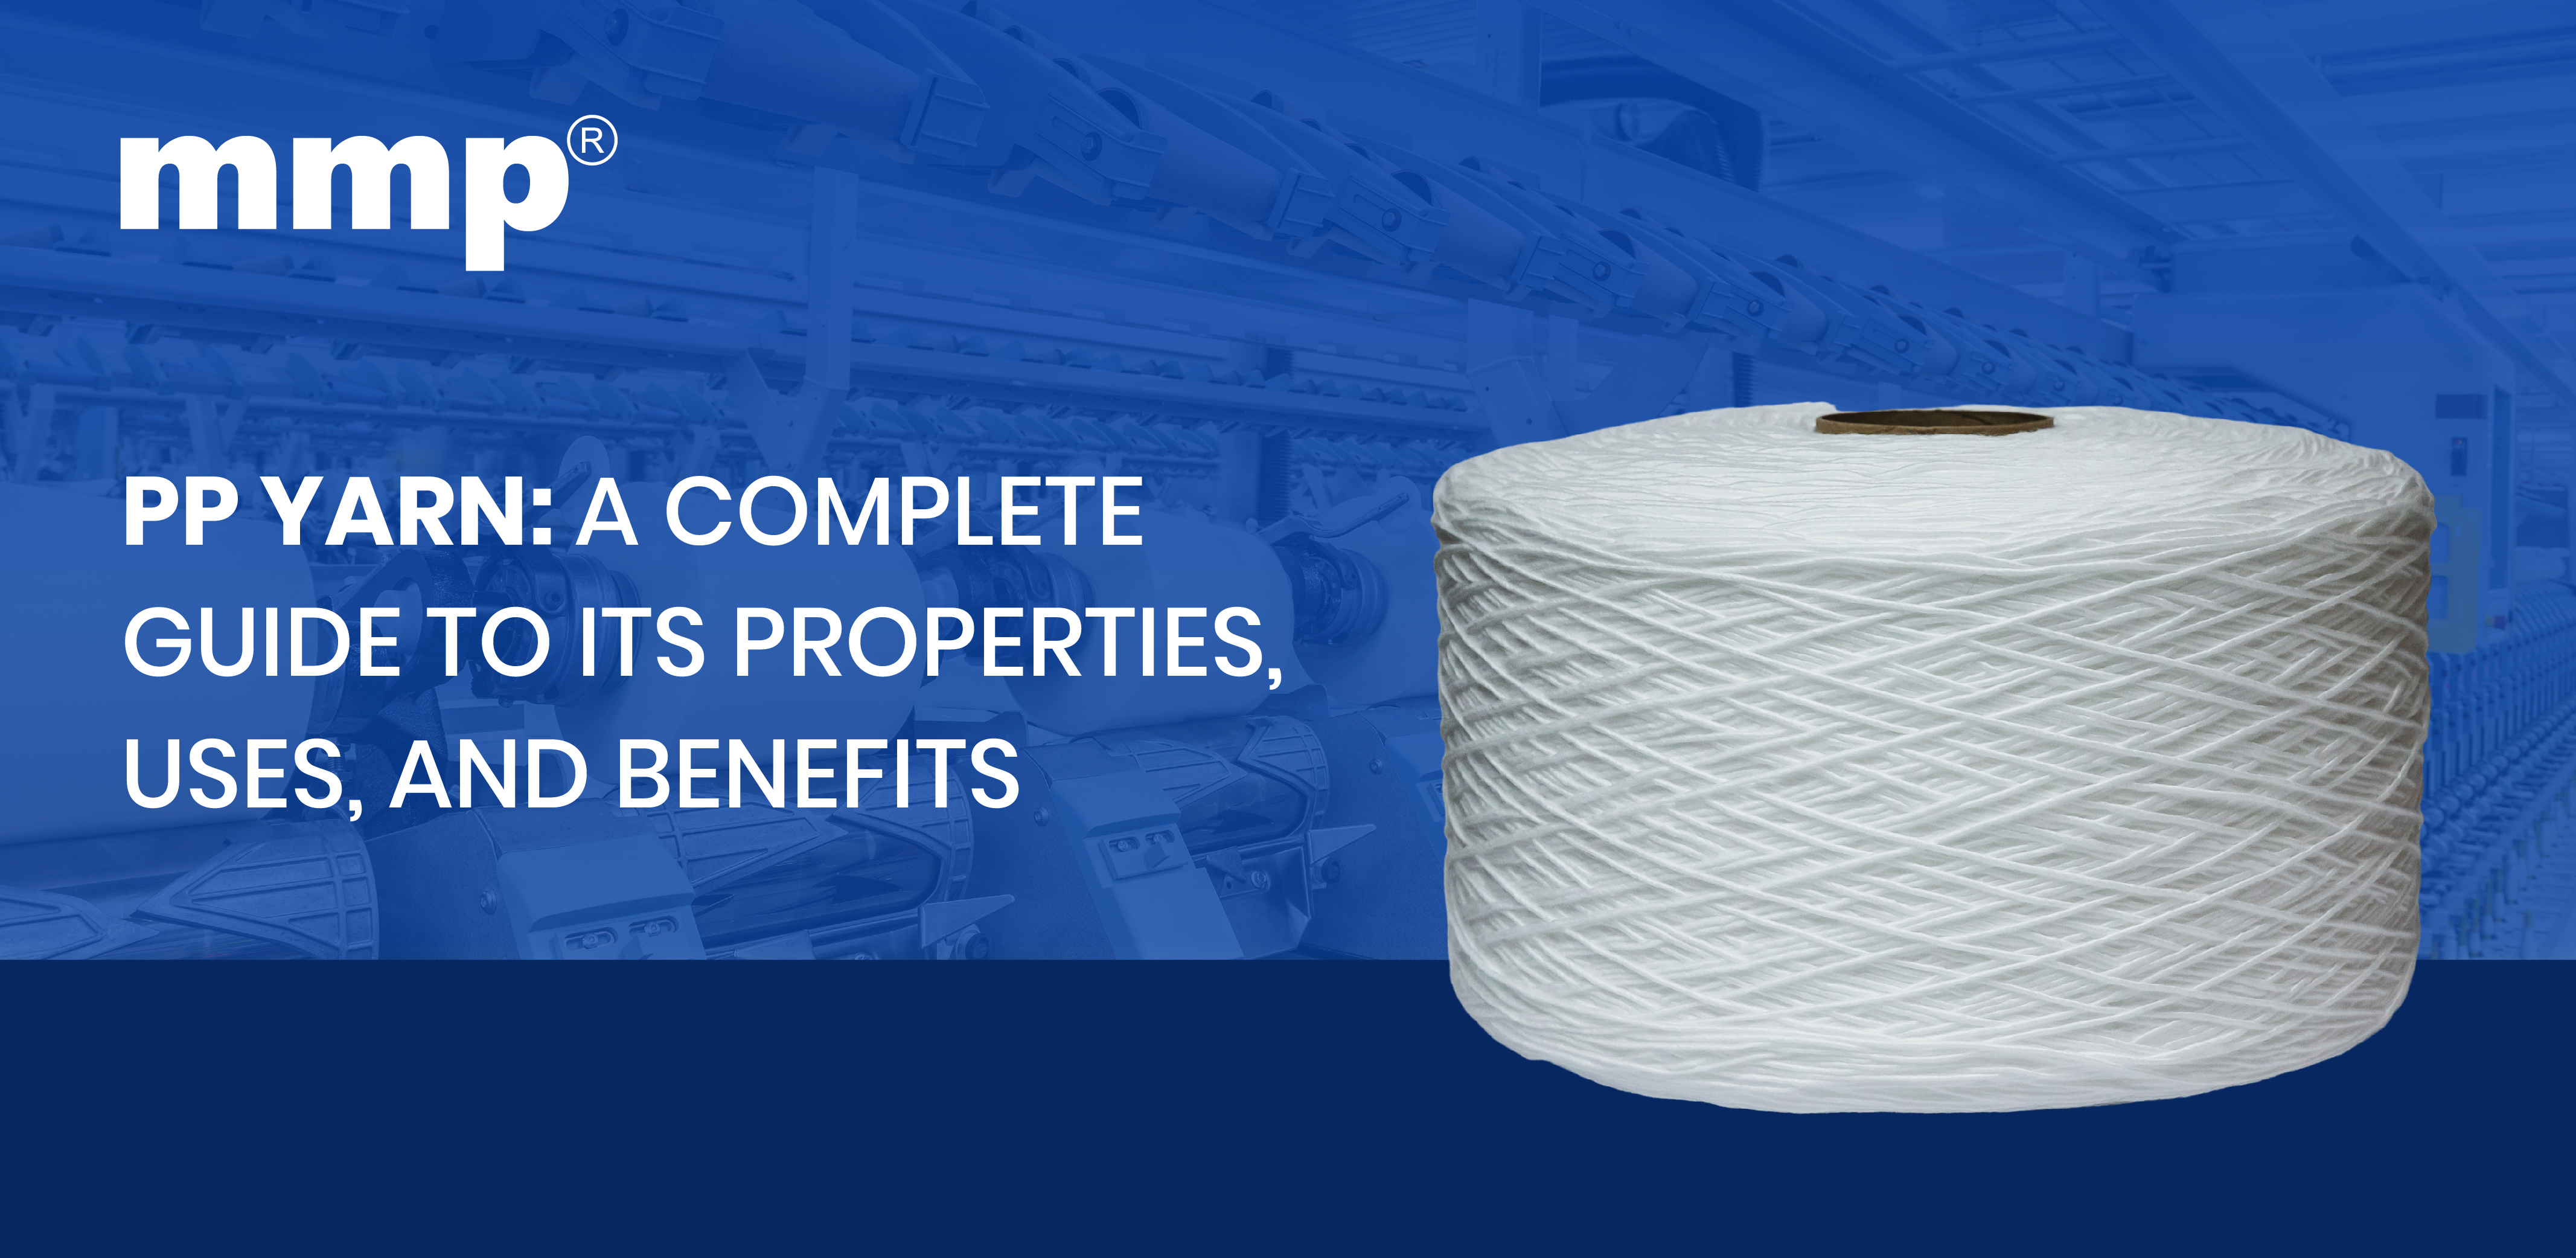 100]

PP YARN: A COMPLETE
GUIDE TO ITS PROPERTIES,
USES, AND BENEFITS